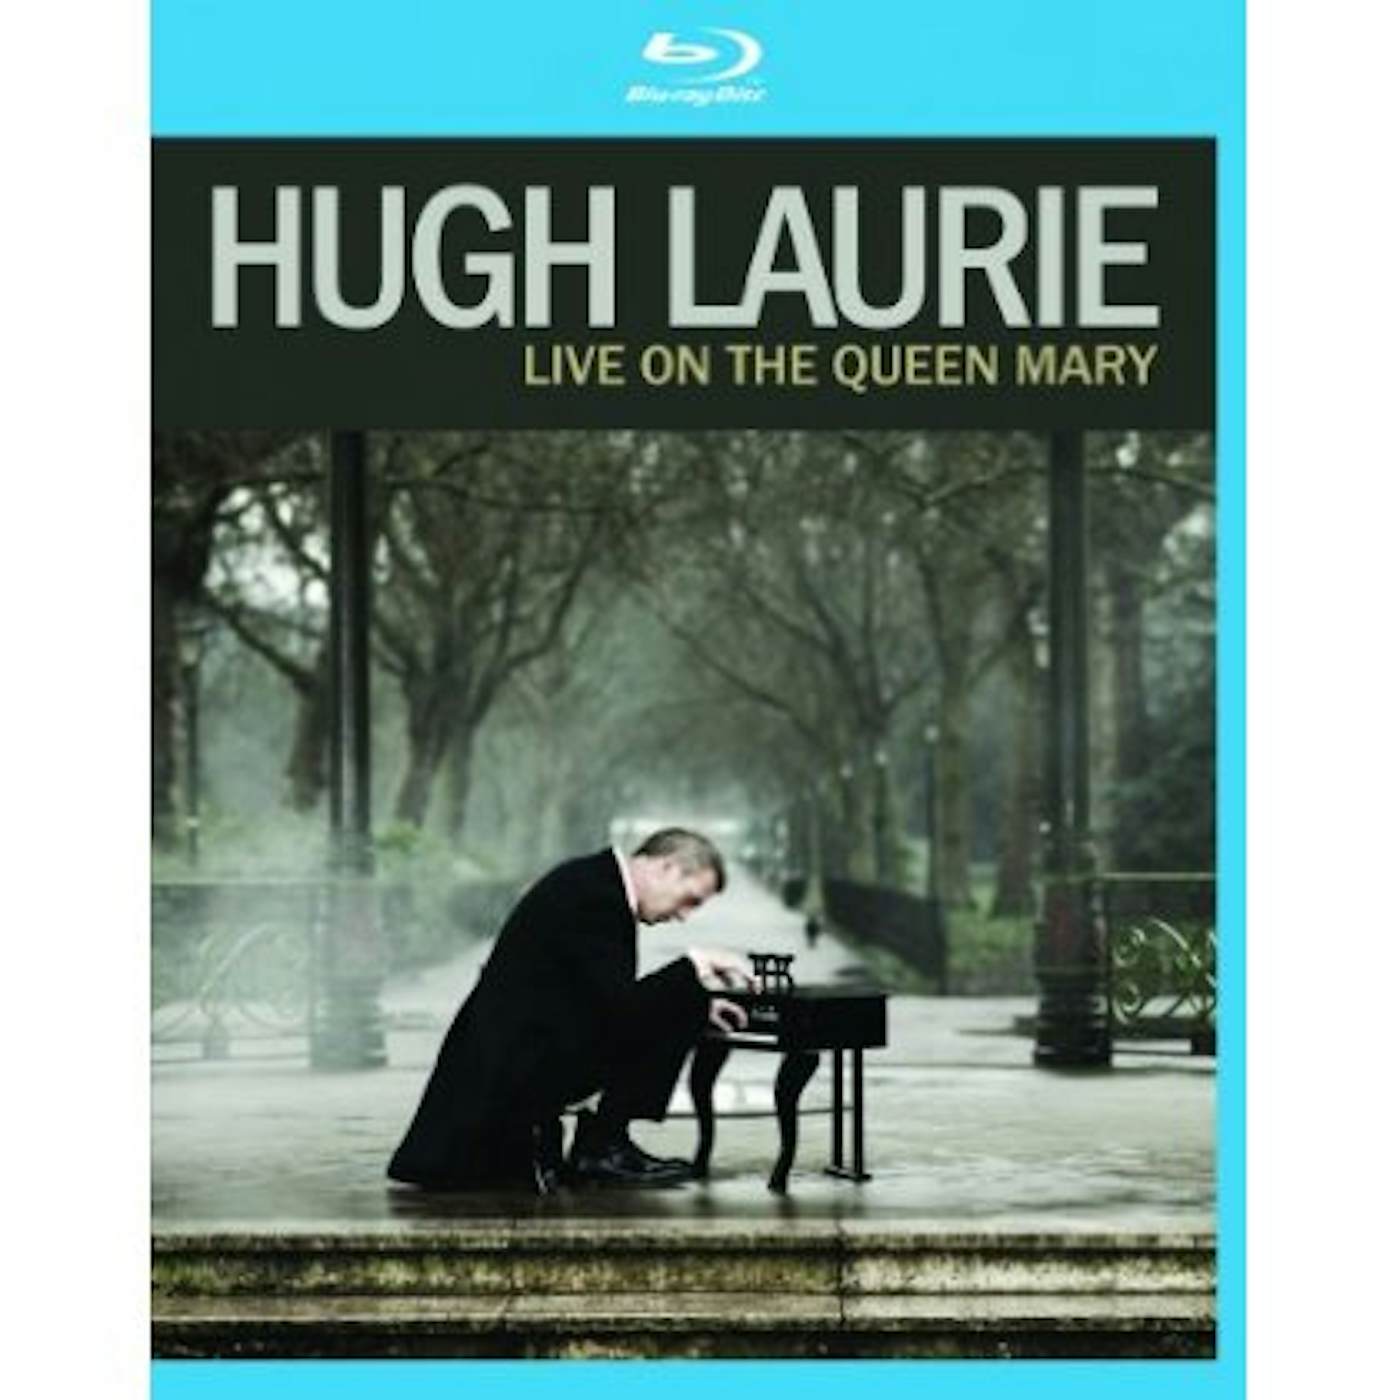 Hugh Laurie LIVE ON THE QUEEN MARY Blu-ray